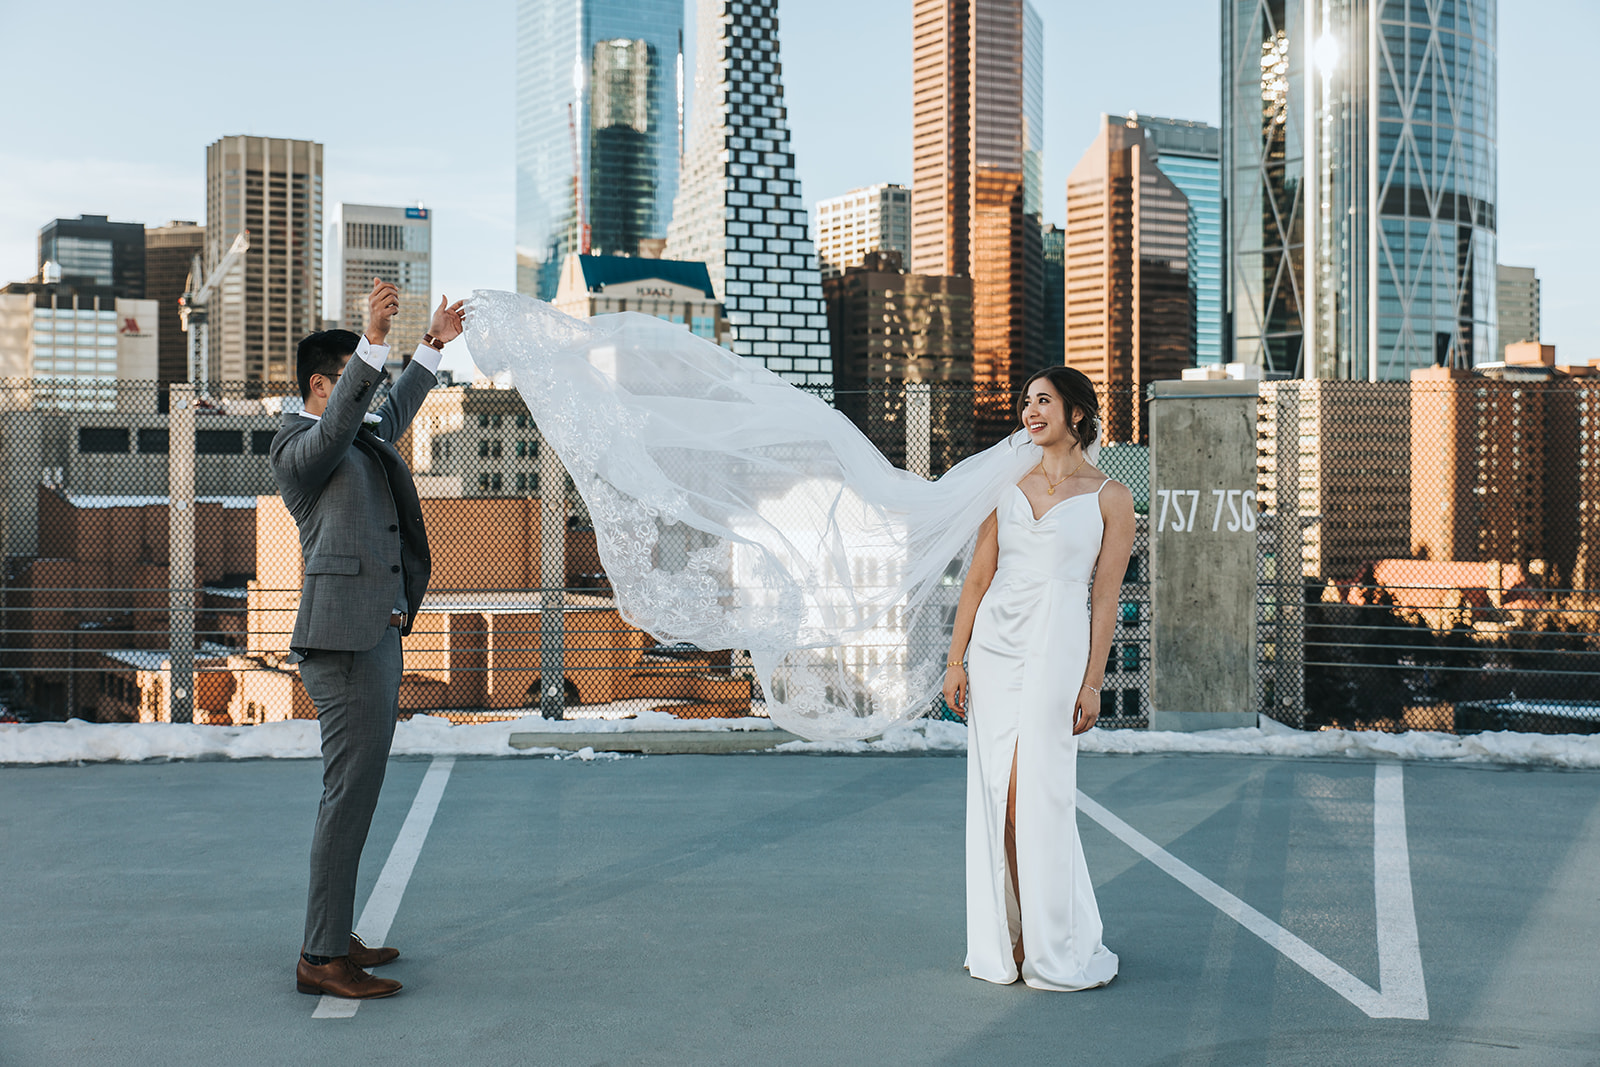 Andrea and Junho's Winter Wedding: A Modern Celebration at The Brownstone